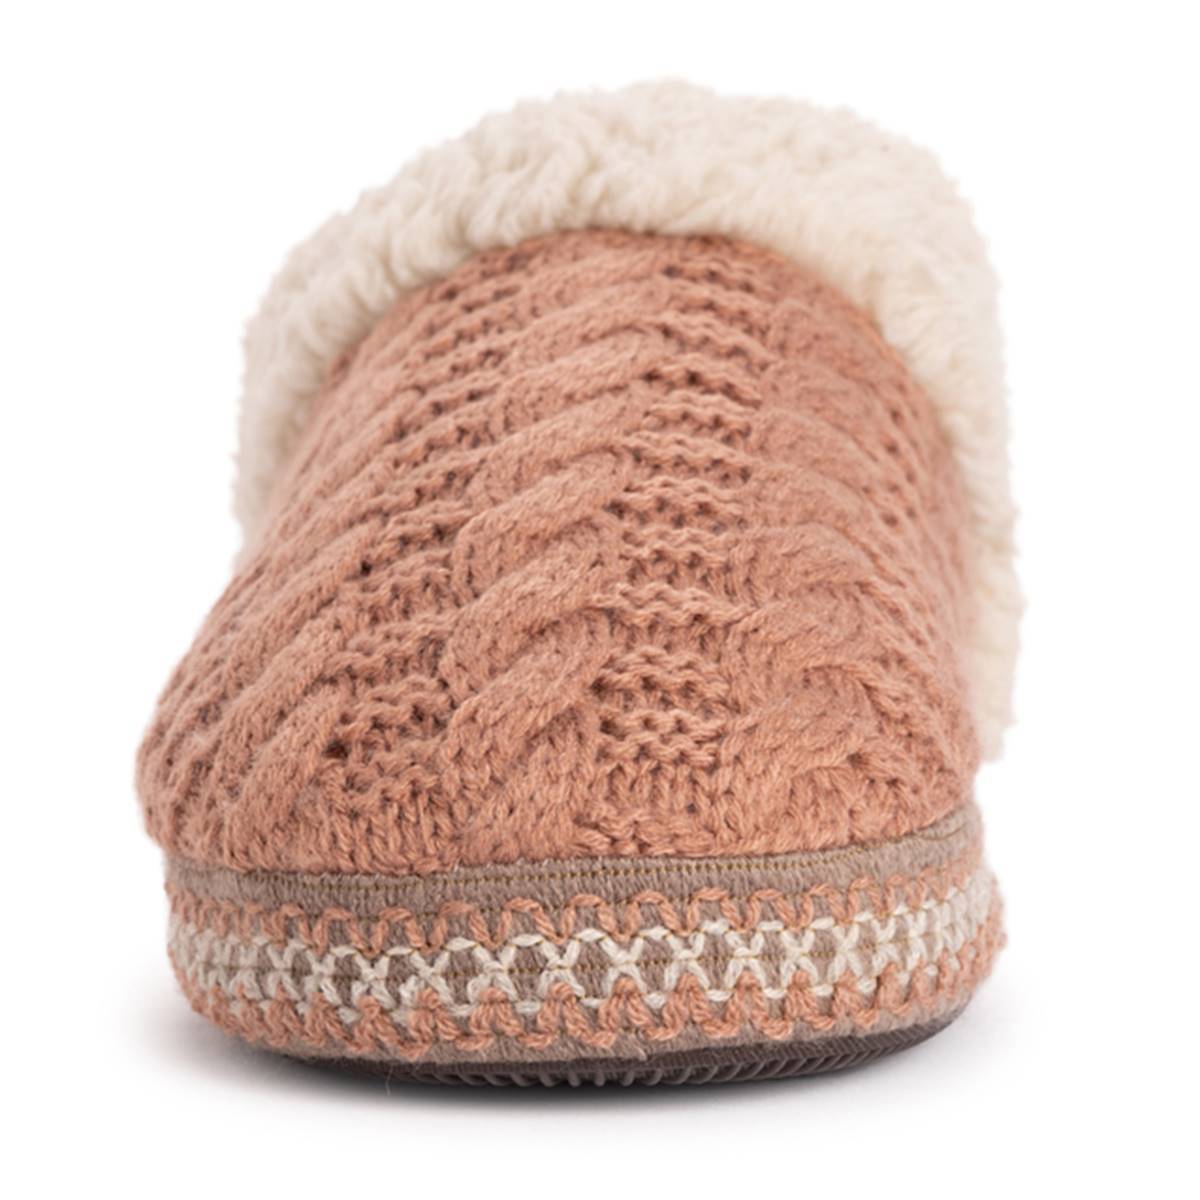 Womens MUK LUKS(R) Magdalena Ruched Cable Slippers